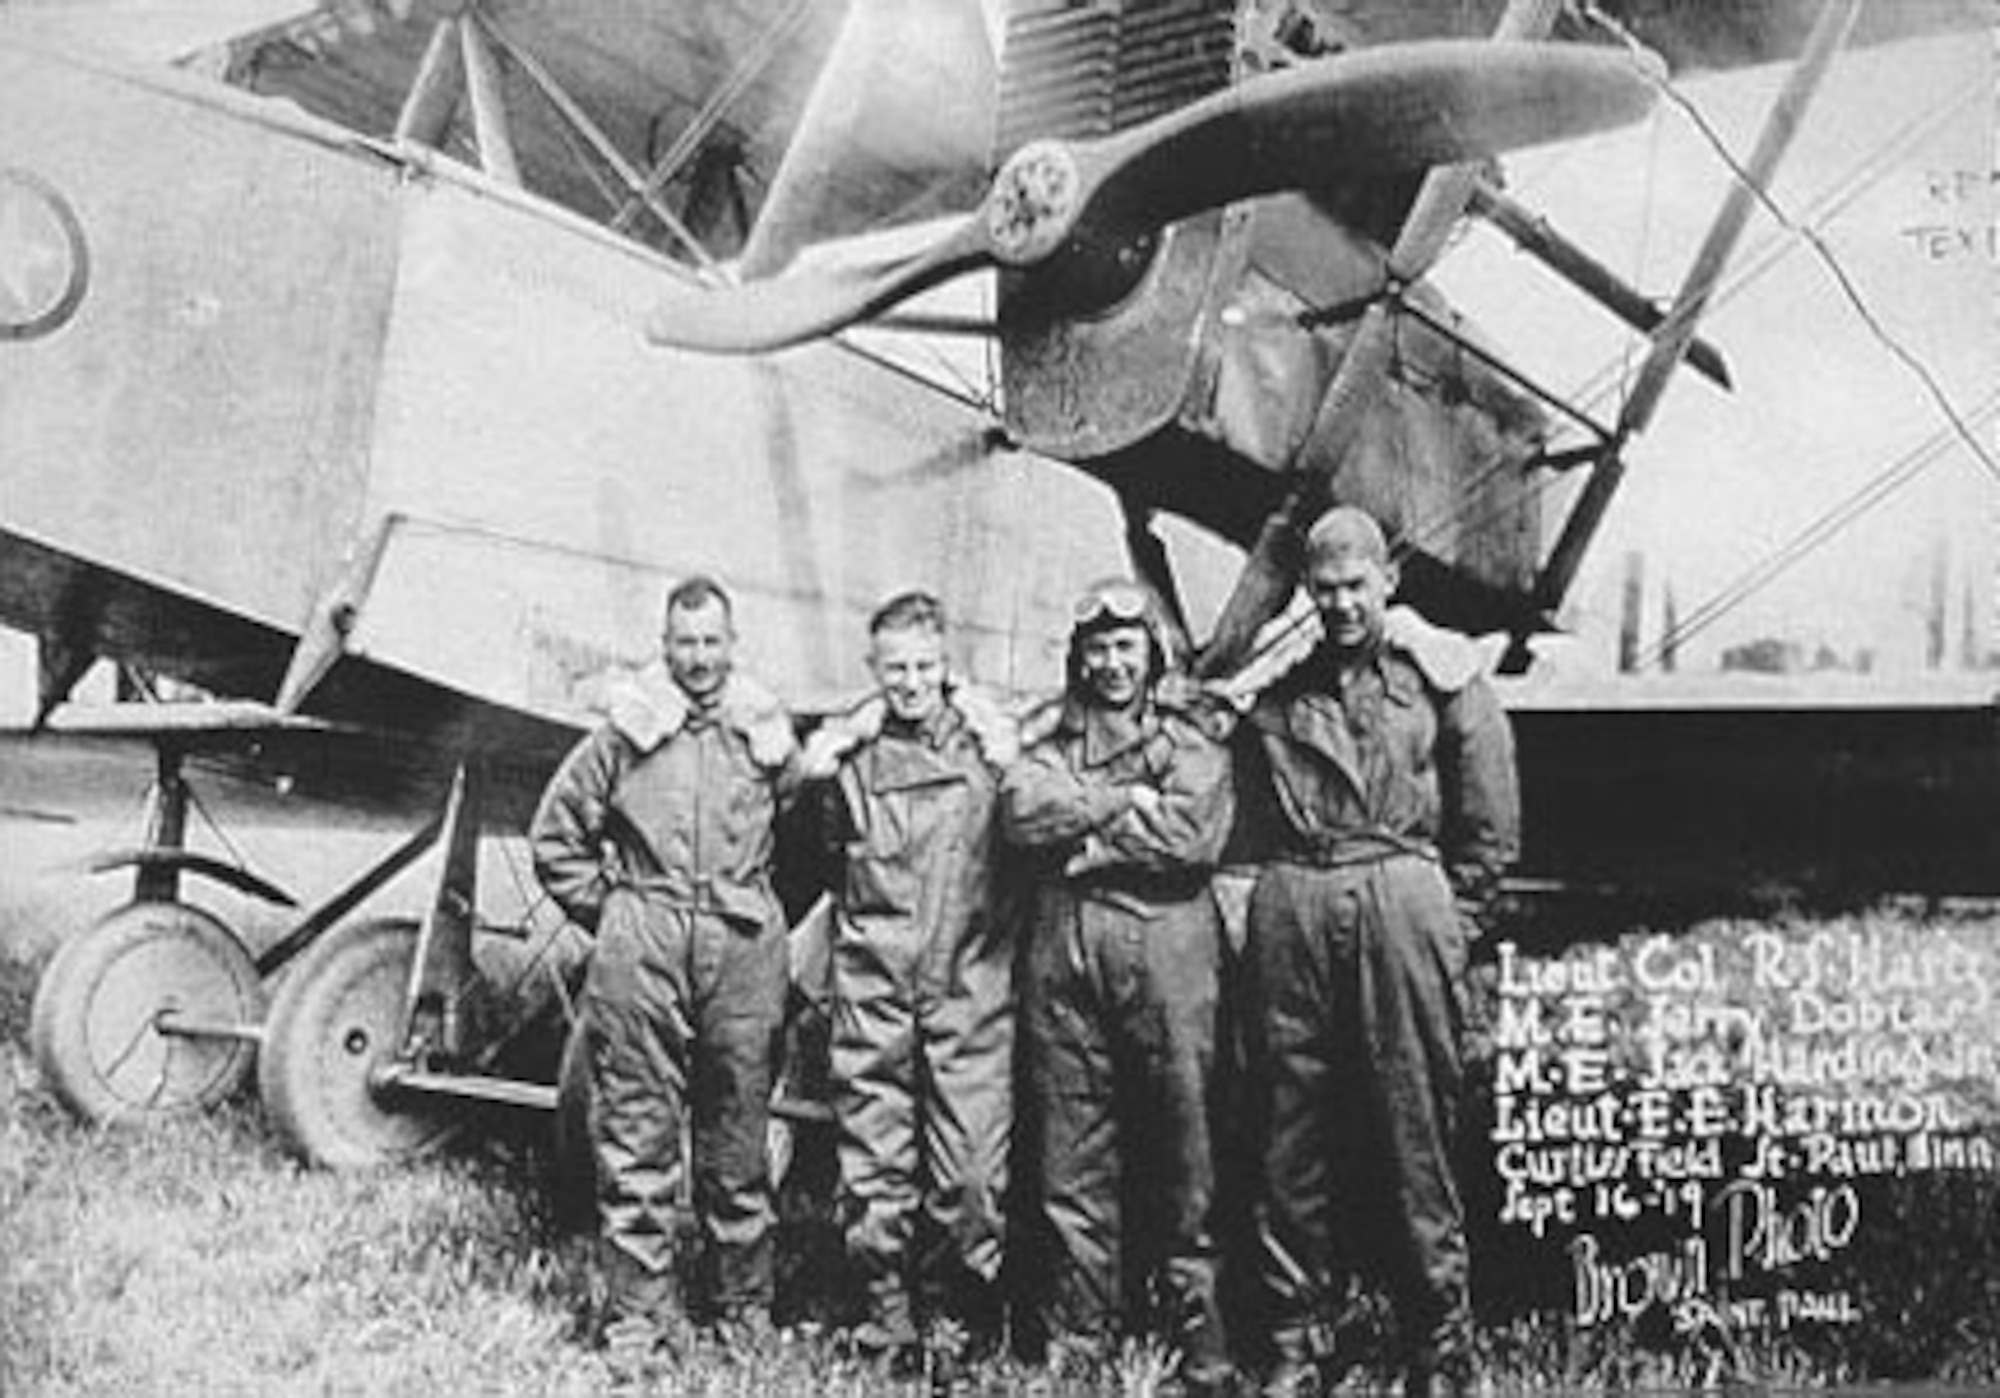 The four flyers of the Round-the-Rim Flight: Lt. Col. R.S. Hartz, Sgt. Jerry Dobias, Sgt. Jack Harding and Lt. Ernest E. Harmon. (U.S. Air Force photo)